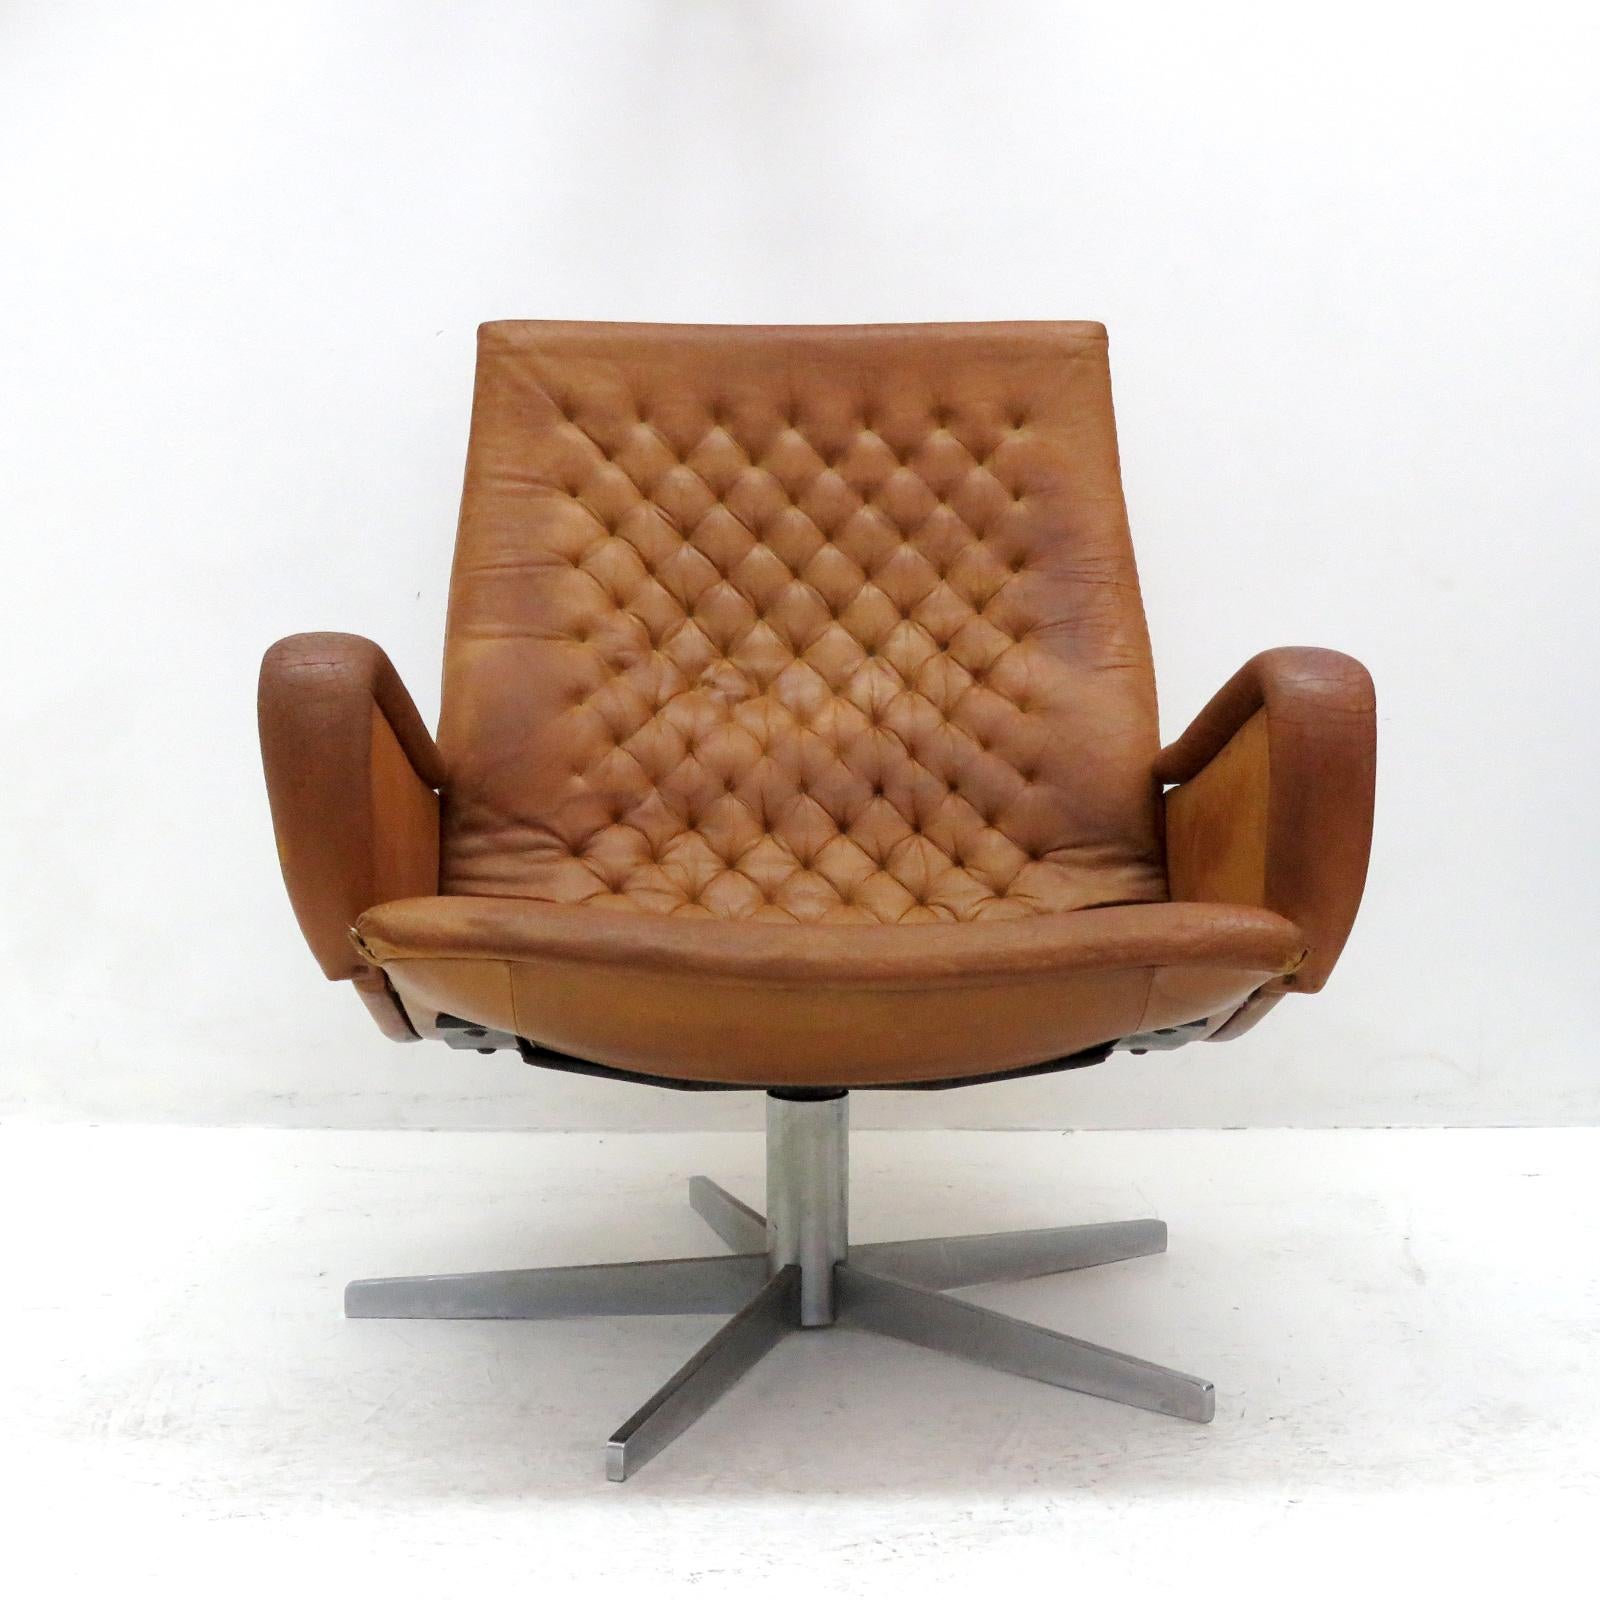 Wonderful leather lounge chair DS-51 by De Sede, Germany, original thick, cognac colored tufted leather on a rotating metal base.